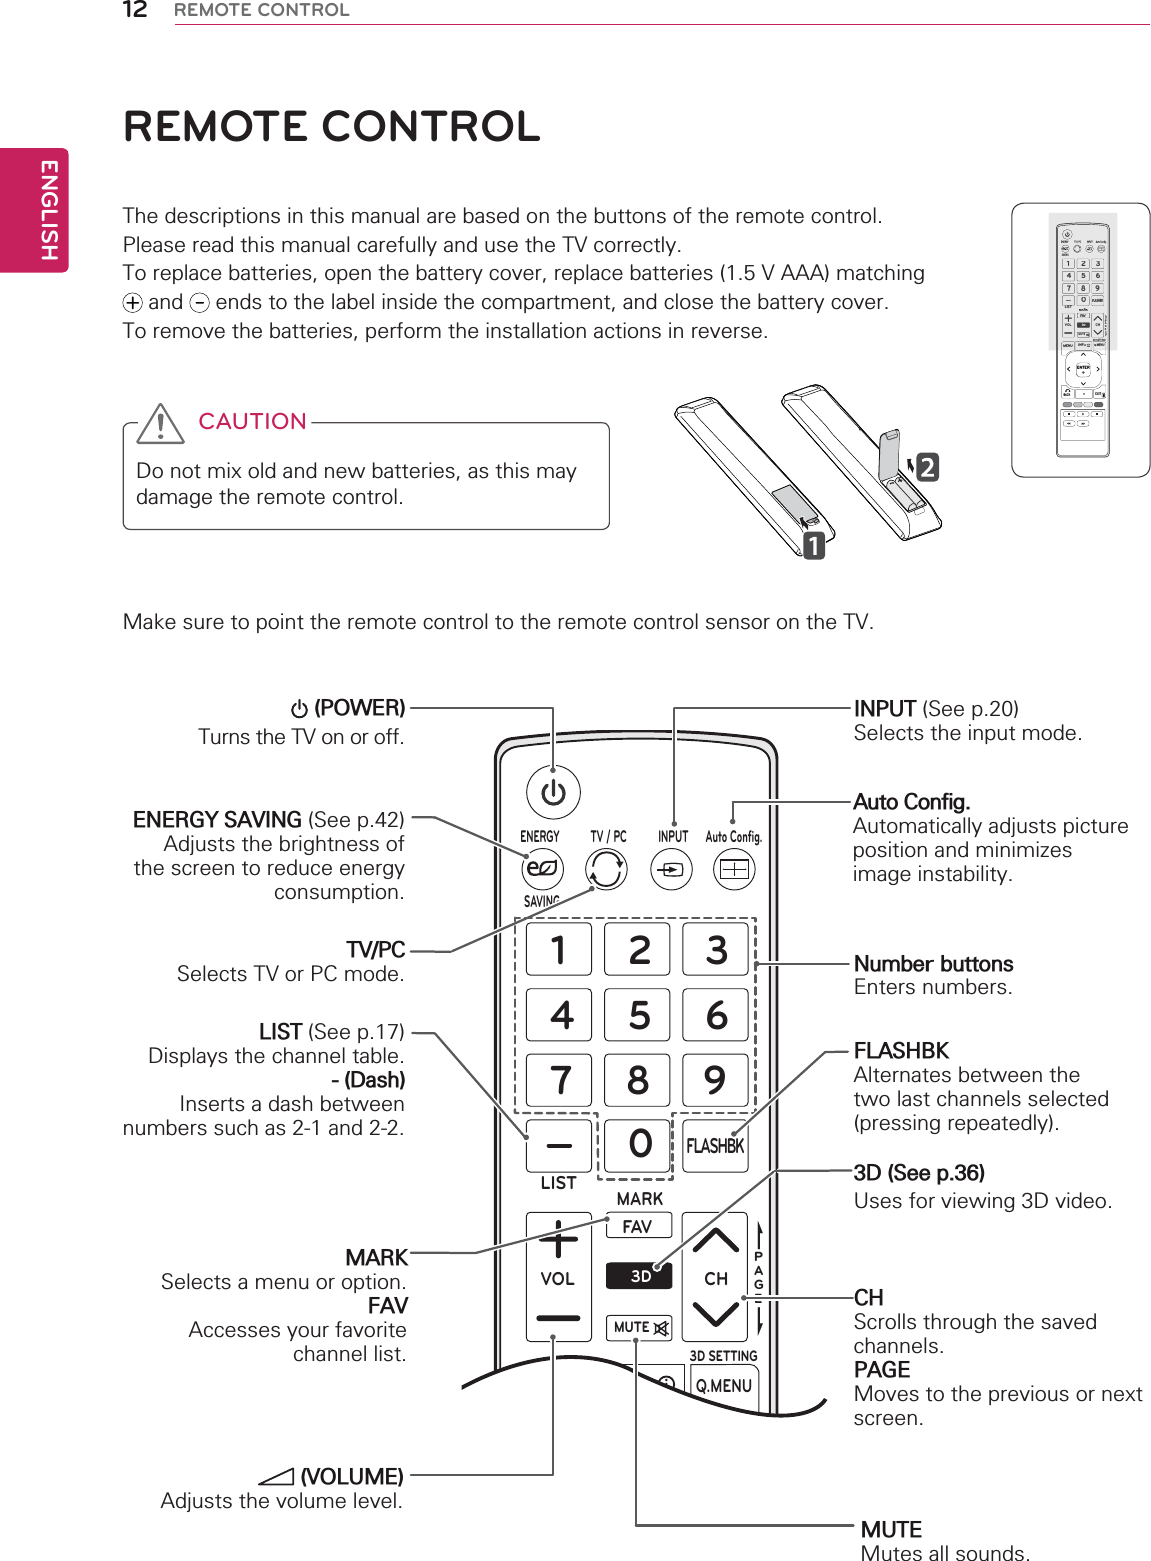 ENGLISH12 REMOTE CONTROLREMOTE CONTROLThe descriptions in this manual are based on the buttons of the remote control. Please read this manual carefully and use the TV correctly.To replace batteries, open the battery cover, replace batteries (1.5 V AAA) matching  and   ends to the label inside the compartment, and close the battery cover.To remove the batteries, perform the installation actions in reverse.Make sure to point the remote control to the remote control sensor on the TV.CAUTIONDo not mix old and new batteries, as this may damage the remote control.PAGE1234506789LISTVOL CHFLASHBKTV / PC INPUT Auto Conﬁg.ENERGY SAVINGMARKFAV3DMUTEMENUINFOQ.MENU3D SETTING (POWER)Turns the TV on or off.ENERGY SAVING (See p.42)Adjusts the brightness of the screen to reduce energy consumption. TV/PCSelects TV or PC mode.LIST (See p.17)Displays the channel table.- (Dash)Inserts a dash between numbers such as 2-1 and 2-2.INPUT (See p.20)Selects the input mode.Number buttonsEnters numbers.MARKSelects a menu or option.FAVAccesses your favorite channel list. (VOLUME)Adjusts the volume level.3D (See p.36)Uses for viewing 3D video.MUTEMutes all sounds.PAGE1234506789LISTVOL CHFLASHBKTV / PC INPUT Auto Conﬁg.ENERGY SAVINGMARKFAV3DMUTEENTERMENUINFOQ.MENU3D SETTINGBACKEXITPAGE1234506789LISTVOL CHFLASHBKTV / PC INPUT Auto Conﬁg.ENERGY SAVINGMARKFAV3DMUTEMENUINFOQ.MENU3D SETTINGCH Scrolls through the saved channels.PAGE Moves to the previous or next screen.FLASHBKAlternates between the two last channels selected (pressing repeatedly).Auto Config.Automatically adjusts picture position and minimizesimage instability.